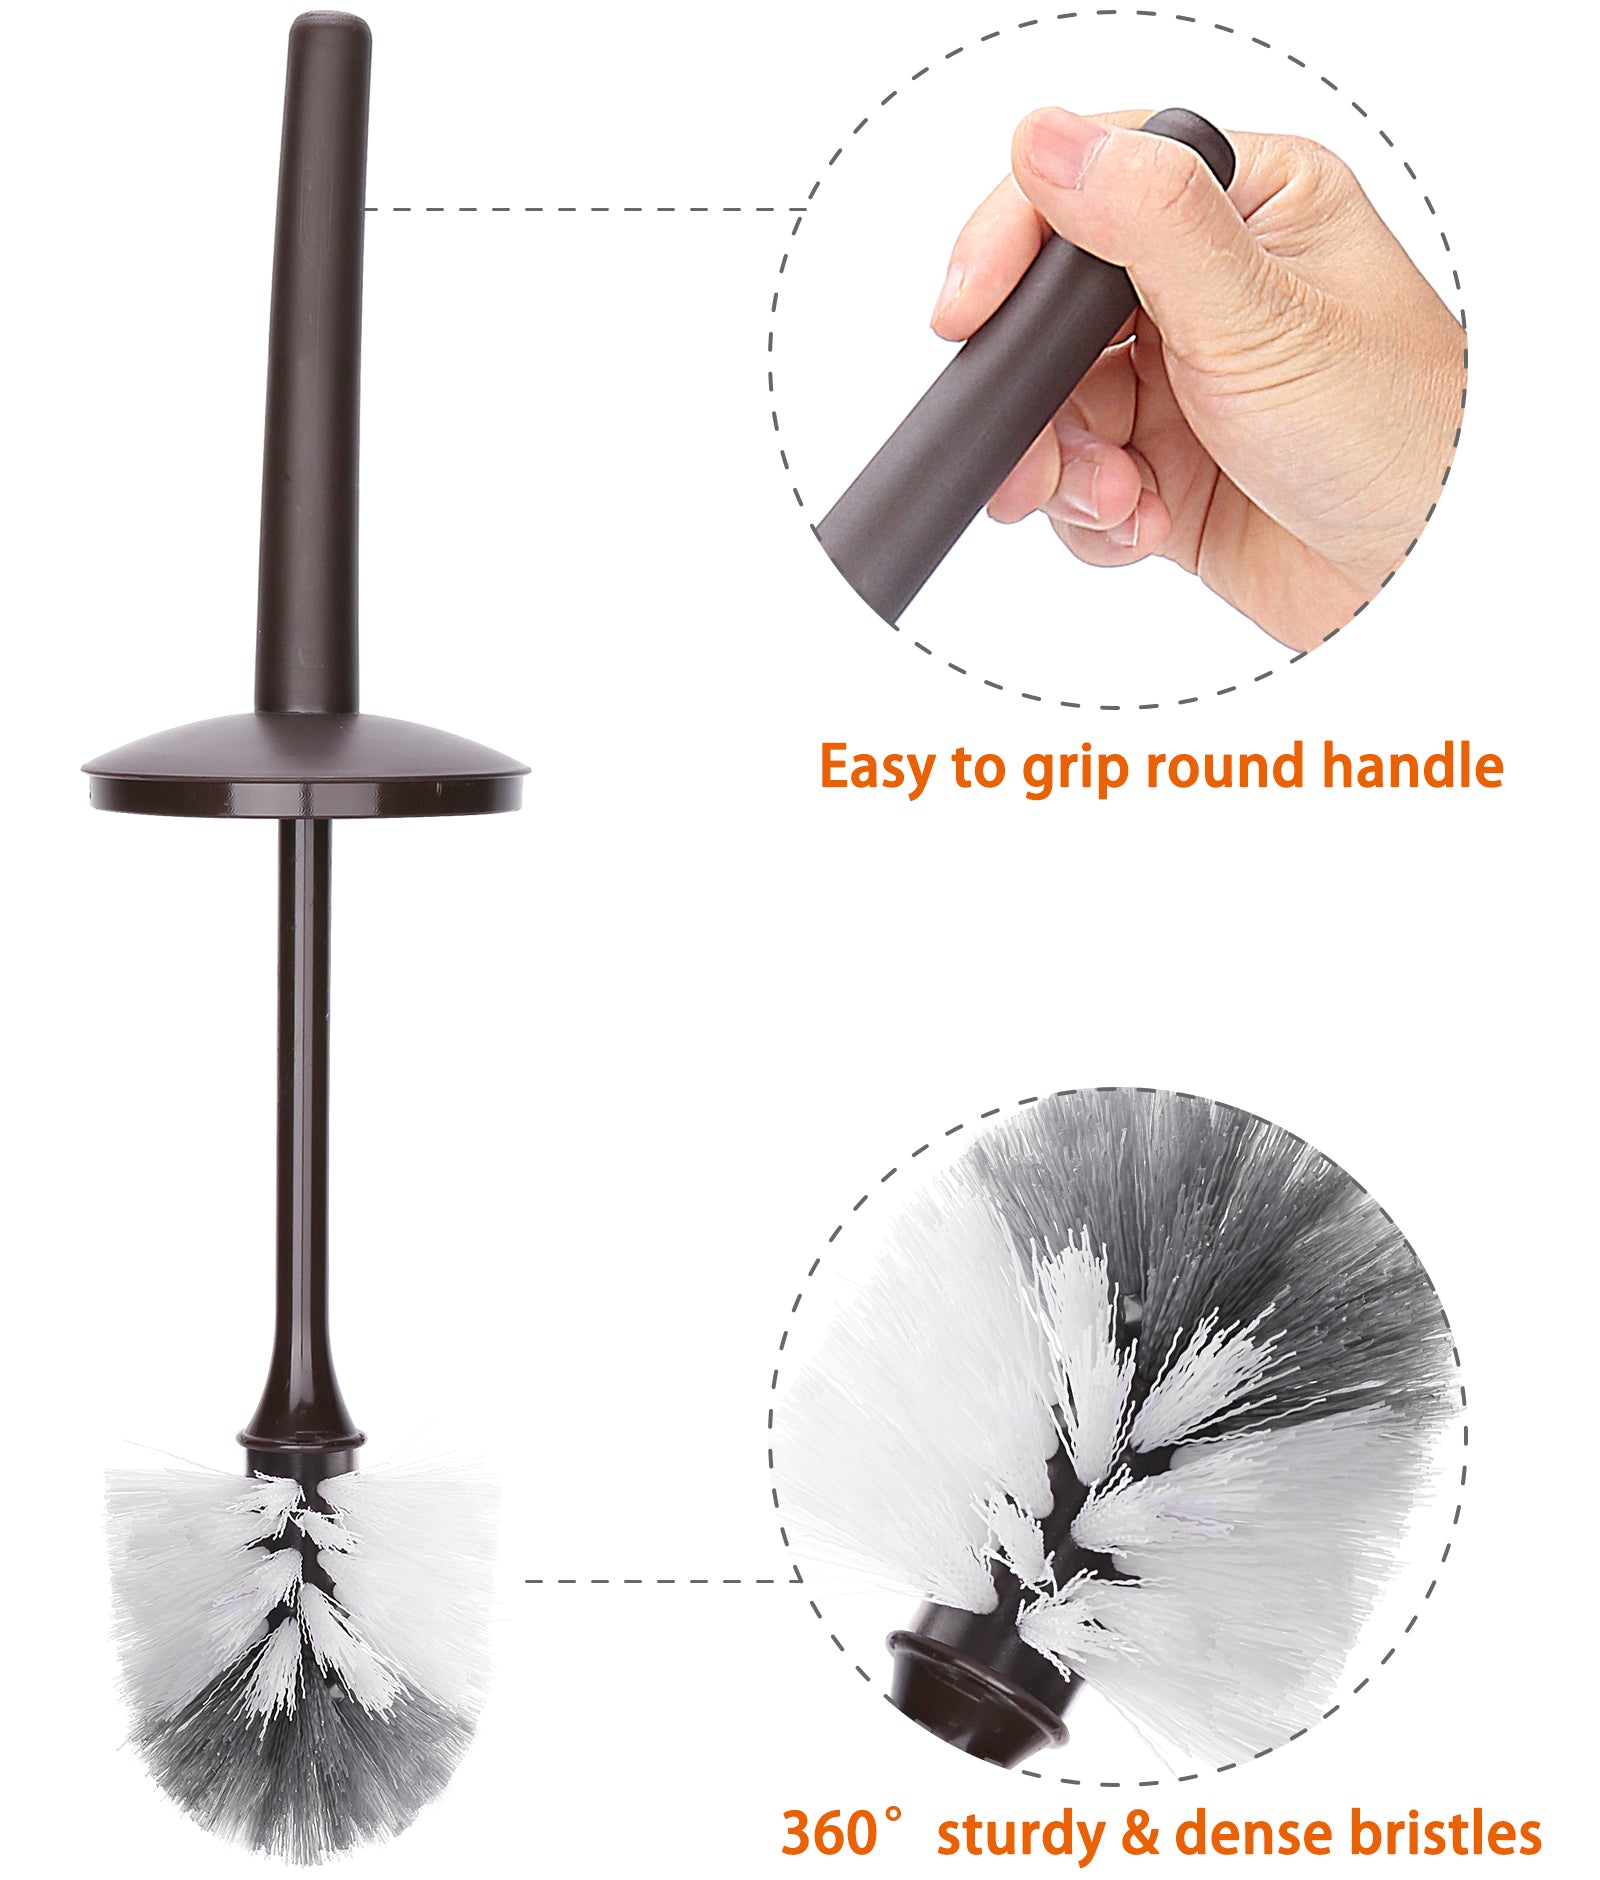 Easy to Use Products Brush Grip Brush Holder